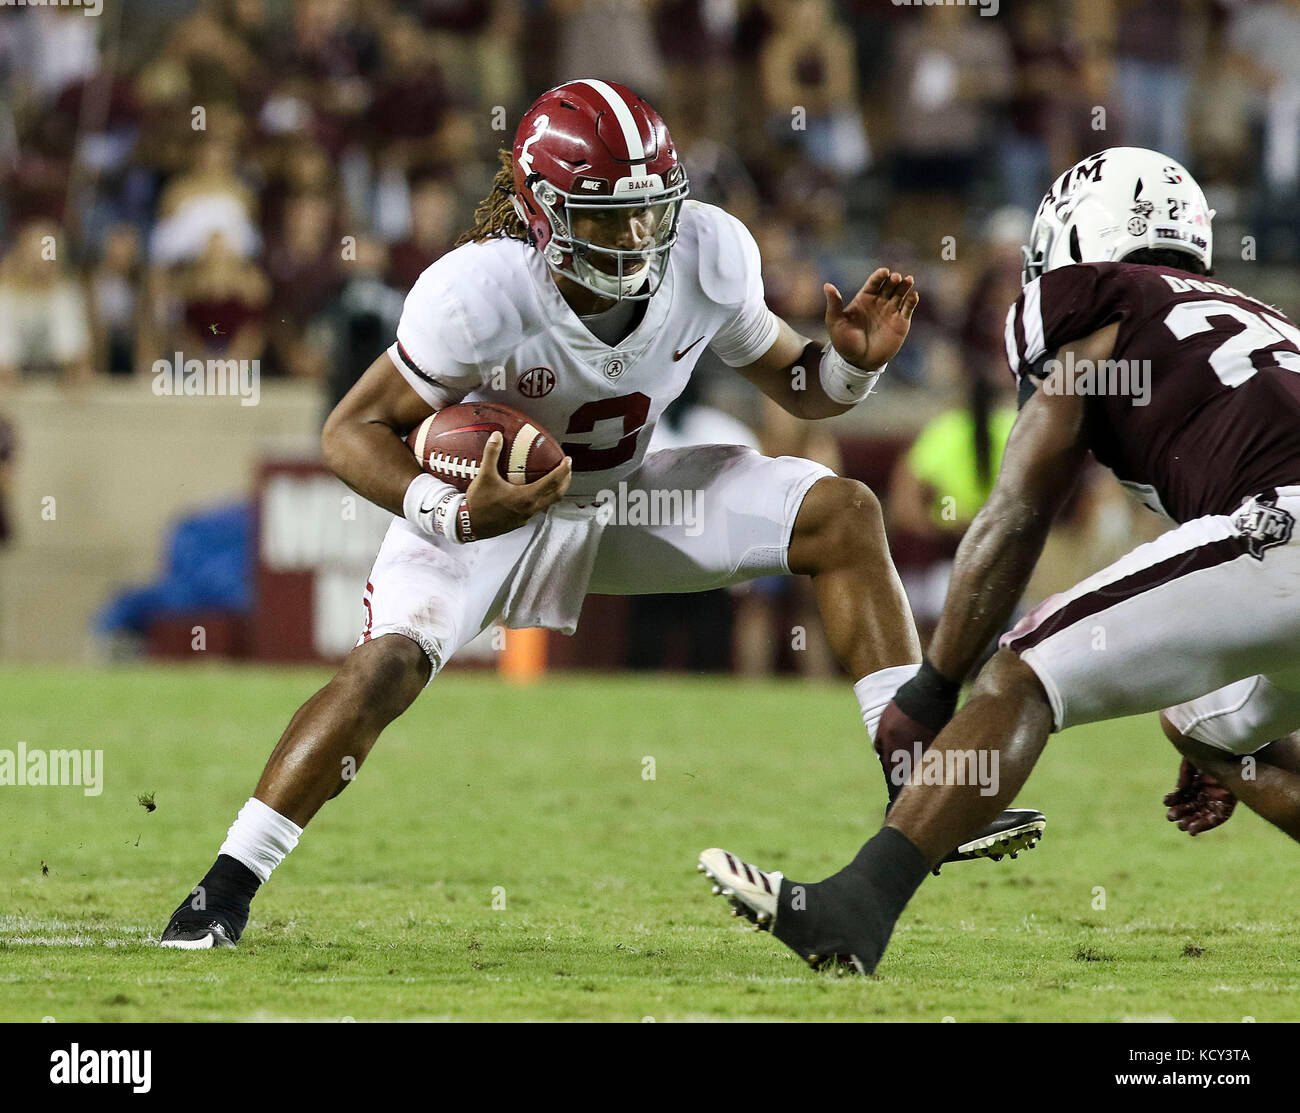 October 6, 2017: Alabama Crimson Tide quarterback Jalen Hurts (2) cuts on a run in the fourth quarter during the NCAA football game between the Alabama Crimson Tide and the Texas A&M Aggies at Kyle Field in College Station, TX; John Glaser/CSM. Stock Photo